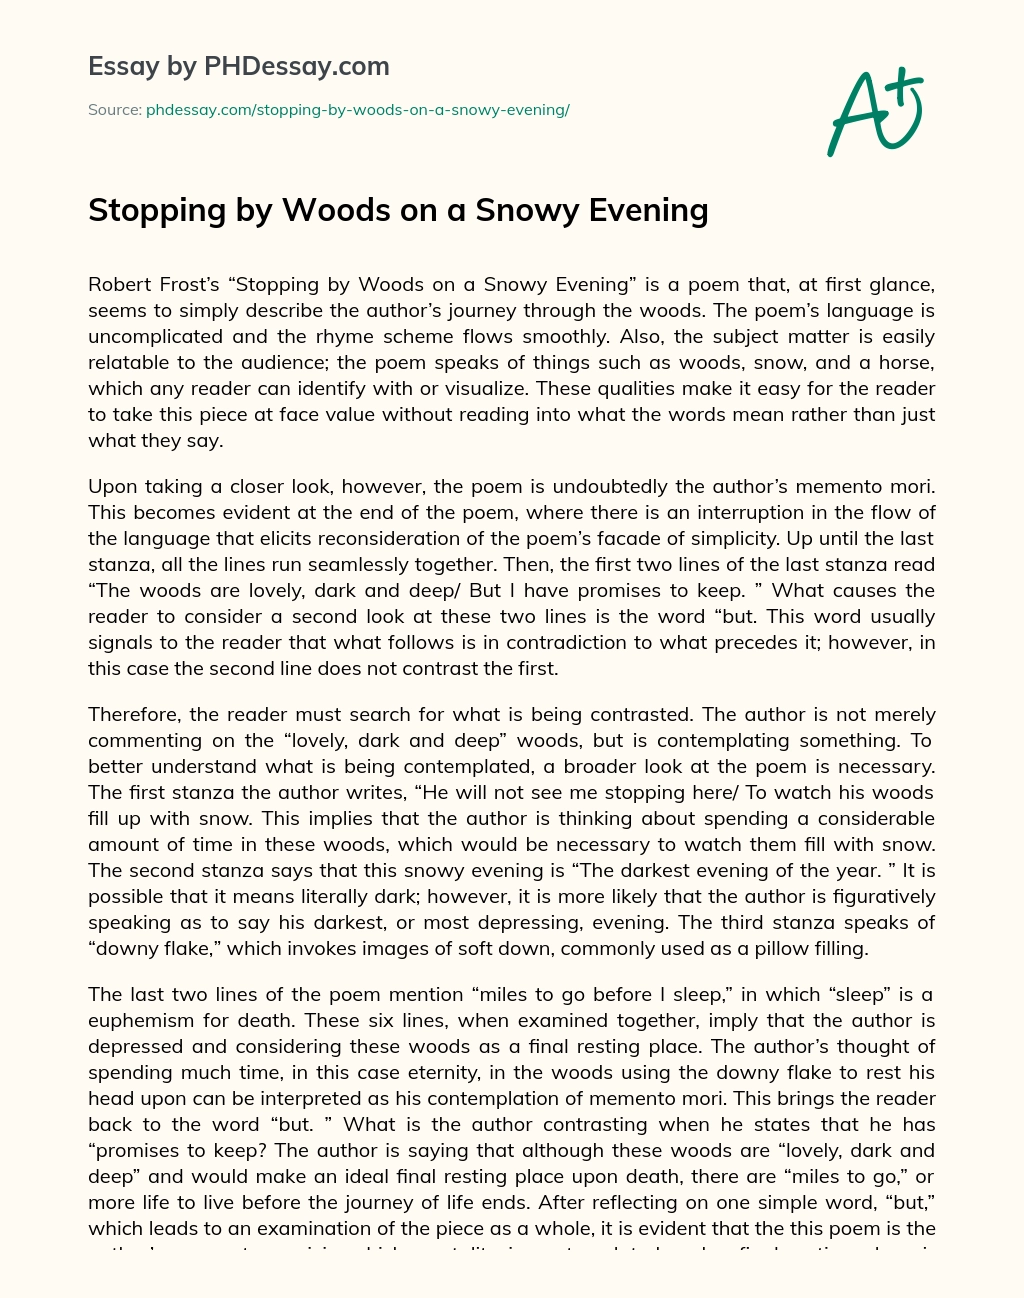 stopping by woods on a snowy evening analysis essay